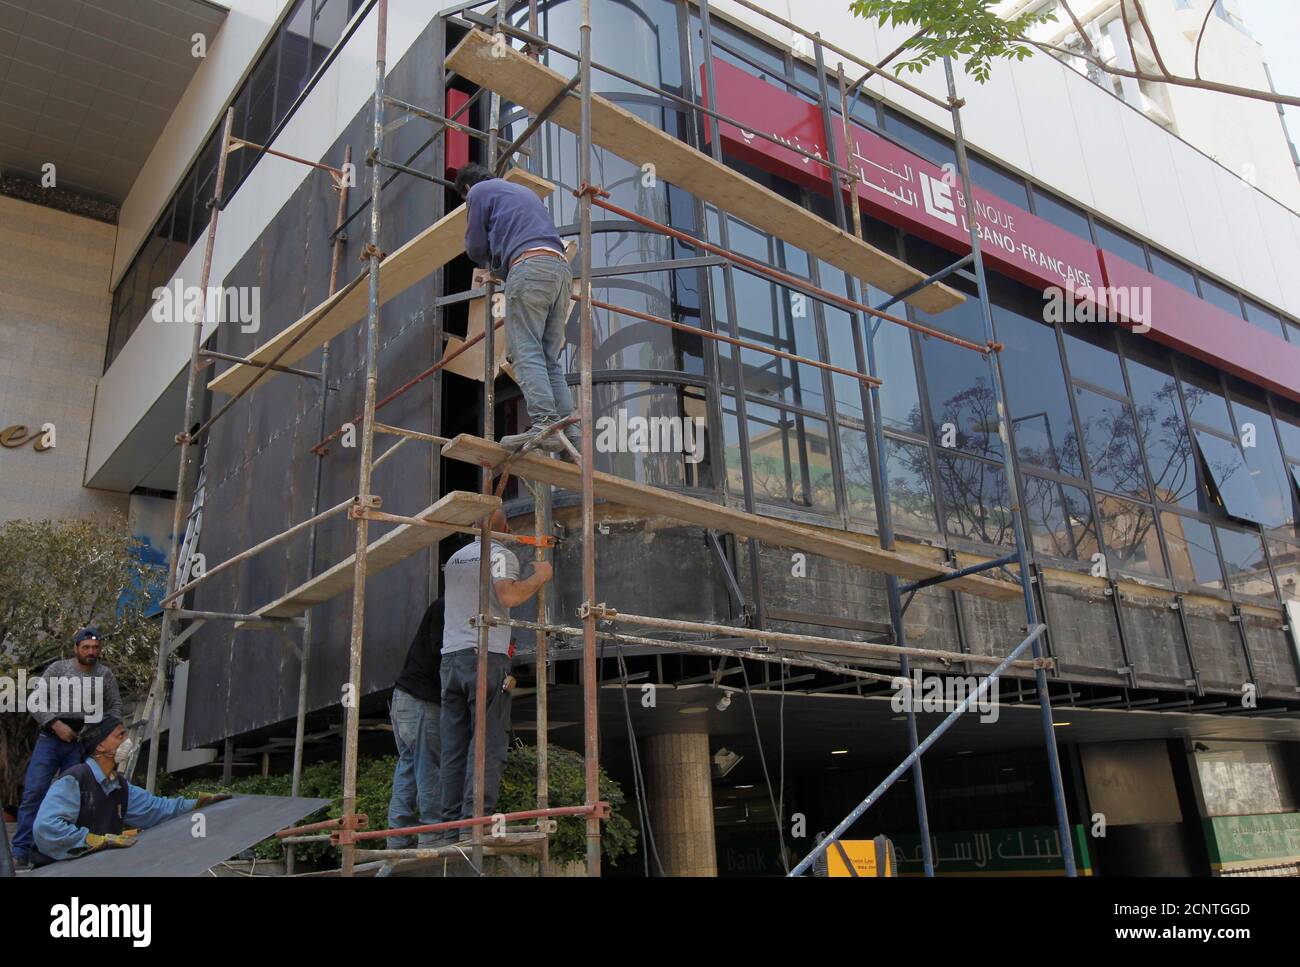 Workers board up the facade of a branch of Banque Libano Francaise (BLF), as a protection measure amid protests against growing economic hardship, in Beirut, Lebanon April 30, 2020. REUTERS/Mohamed Azakir Stock Photo